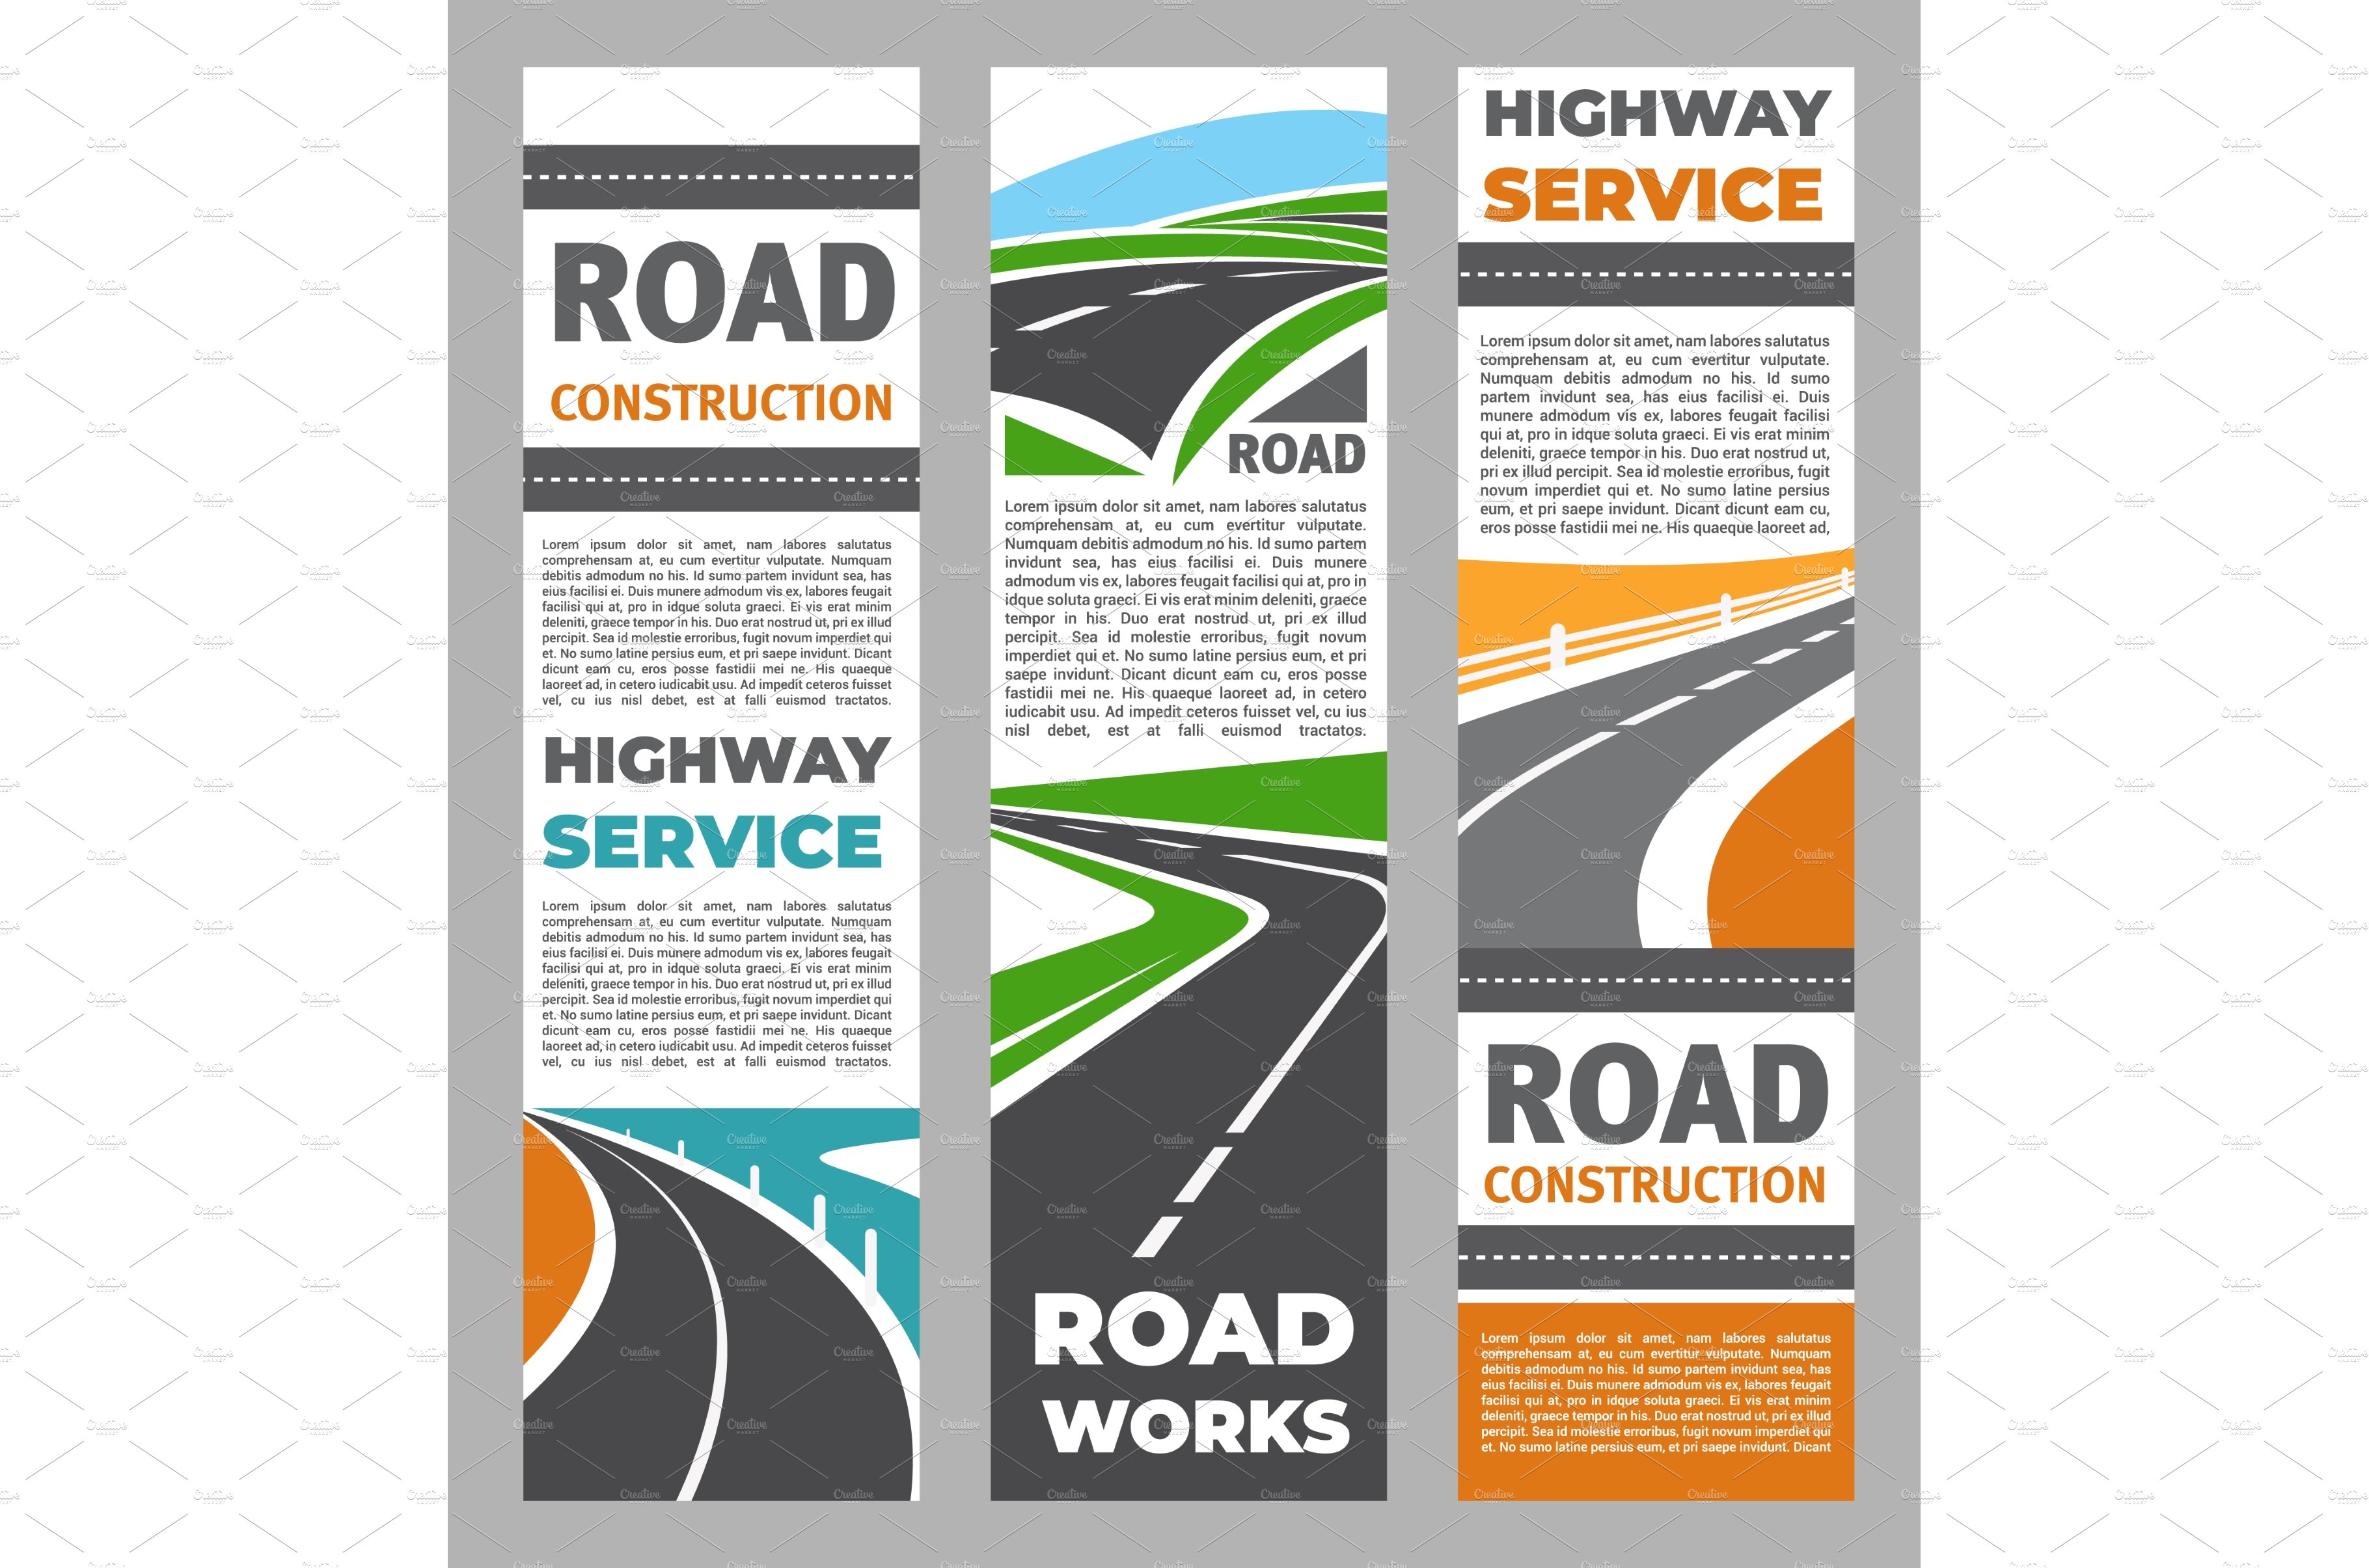 Highway construction, road repair cover image.